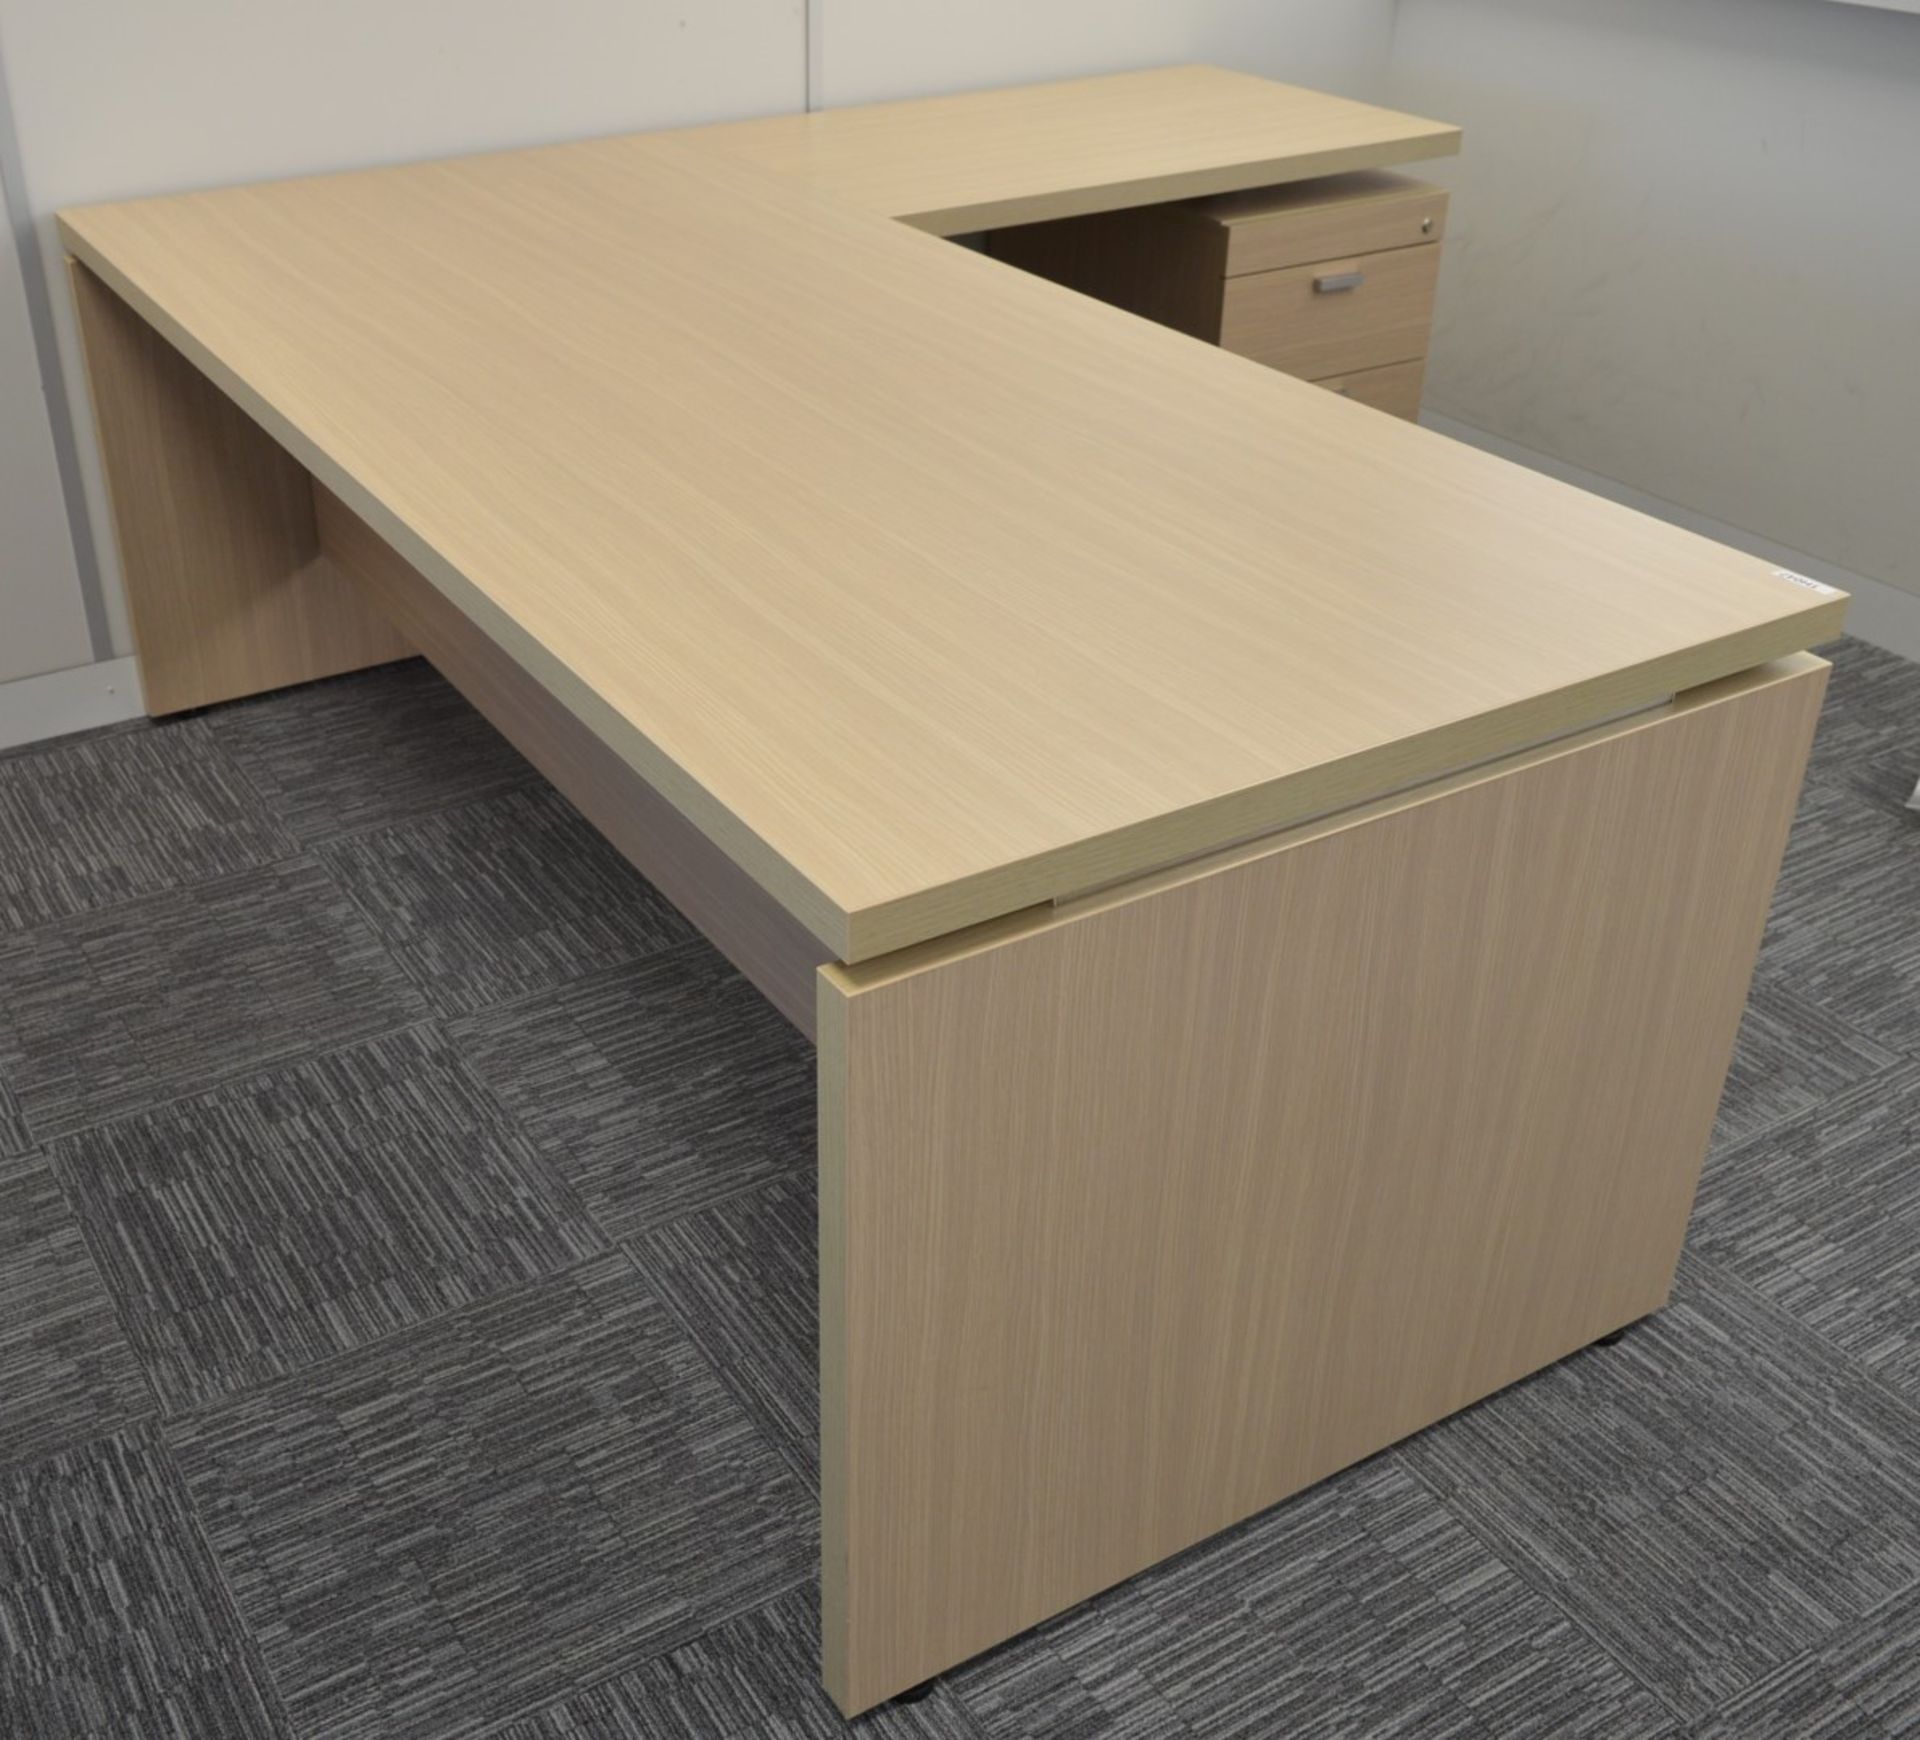 1 x Babini Executives Office Desk With Three Drawer Pedestal and Side Table - Attractive Finish With - Image 6 of 9